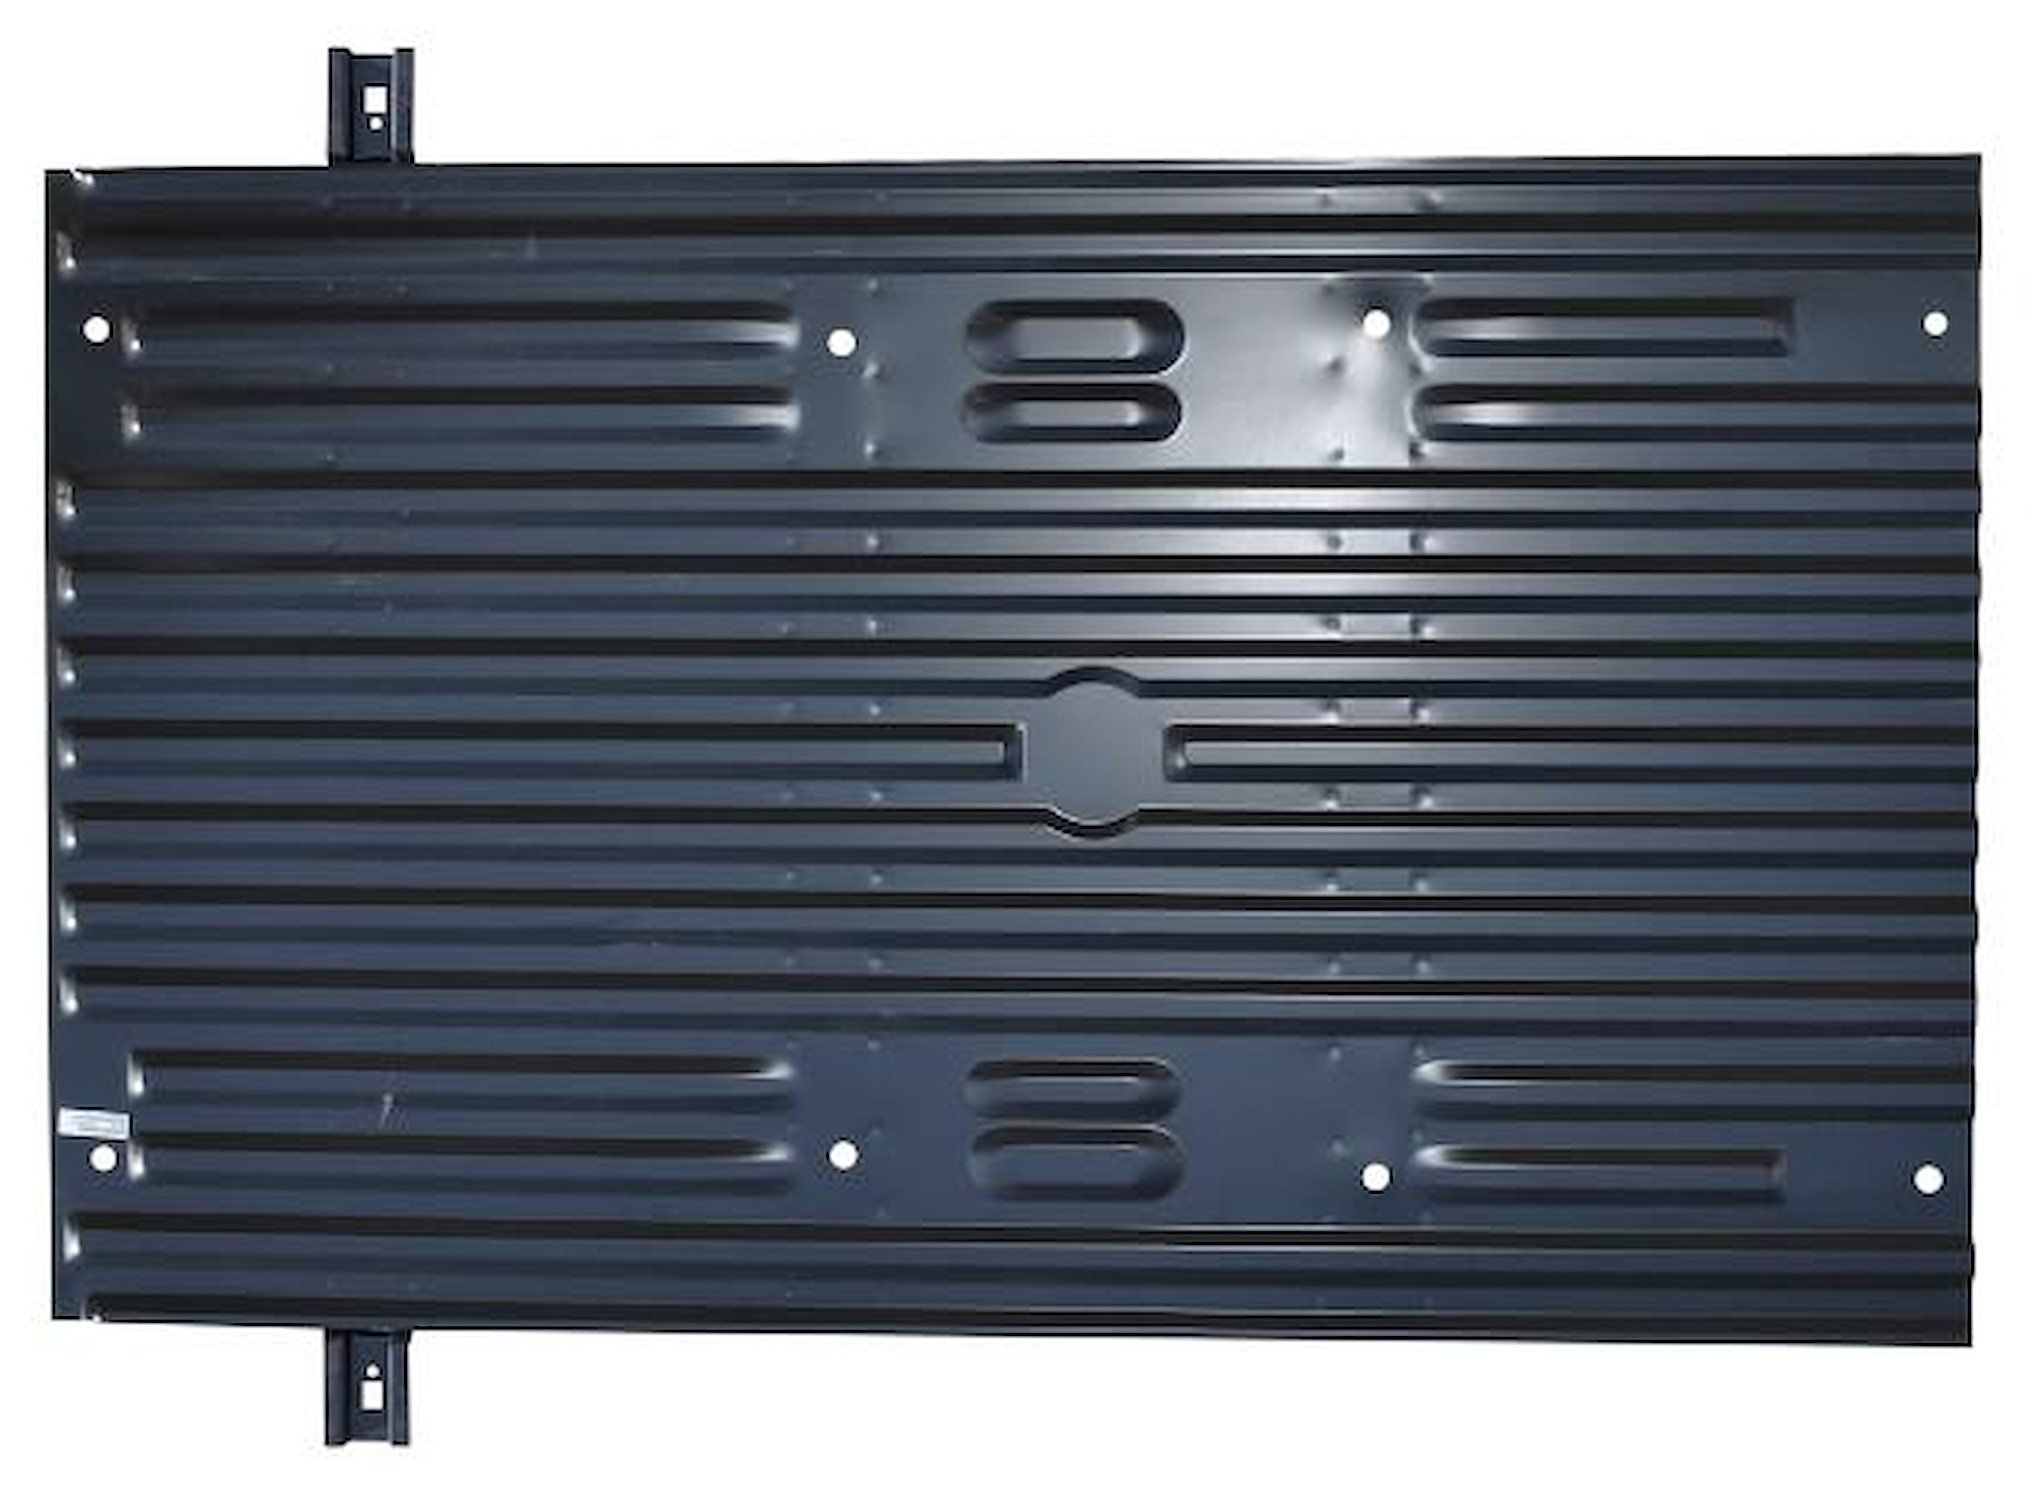 1987-321 Truck Bed Floor Assembly for 1999-2016 Ford Super-Duty Pickup Truck w/6 3/4 ft. Bed